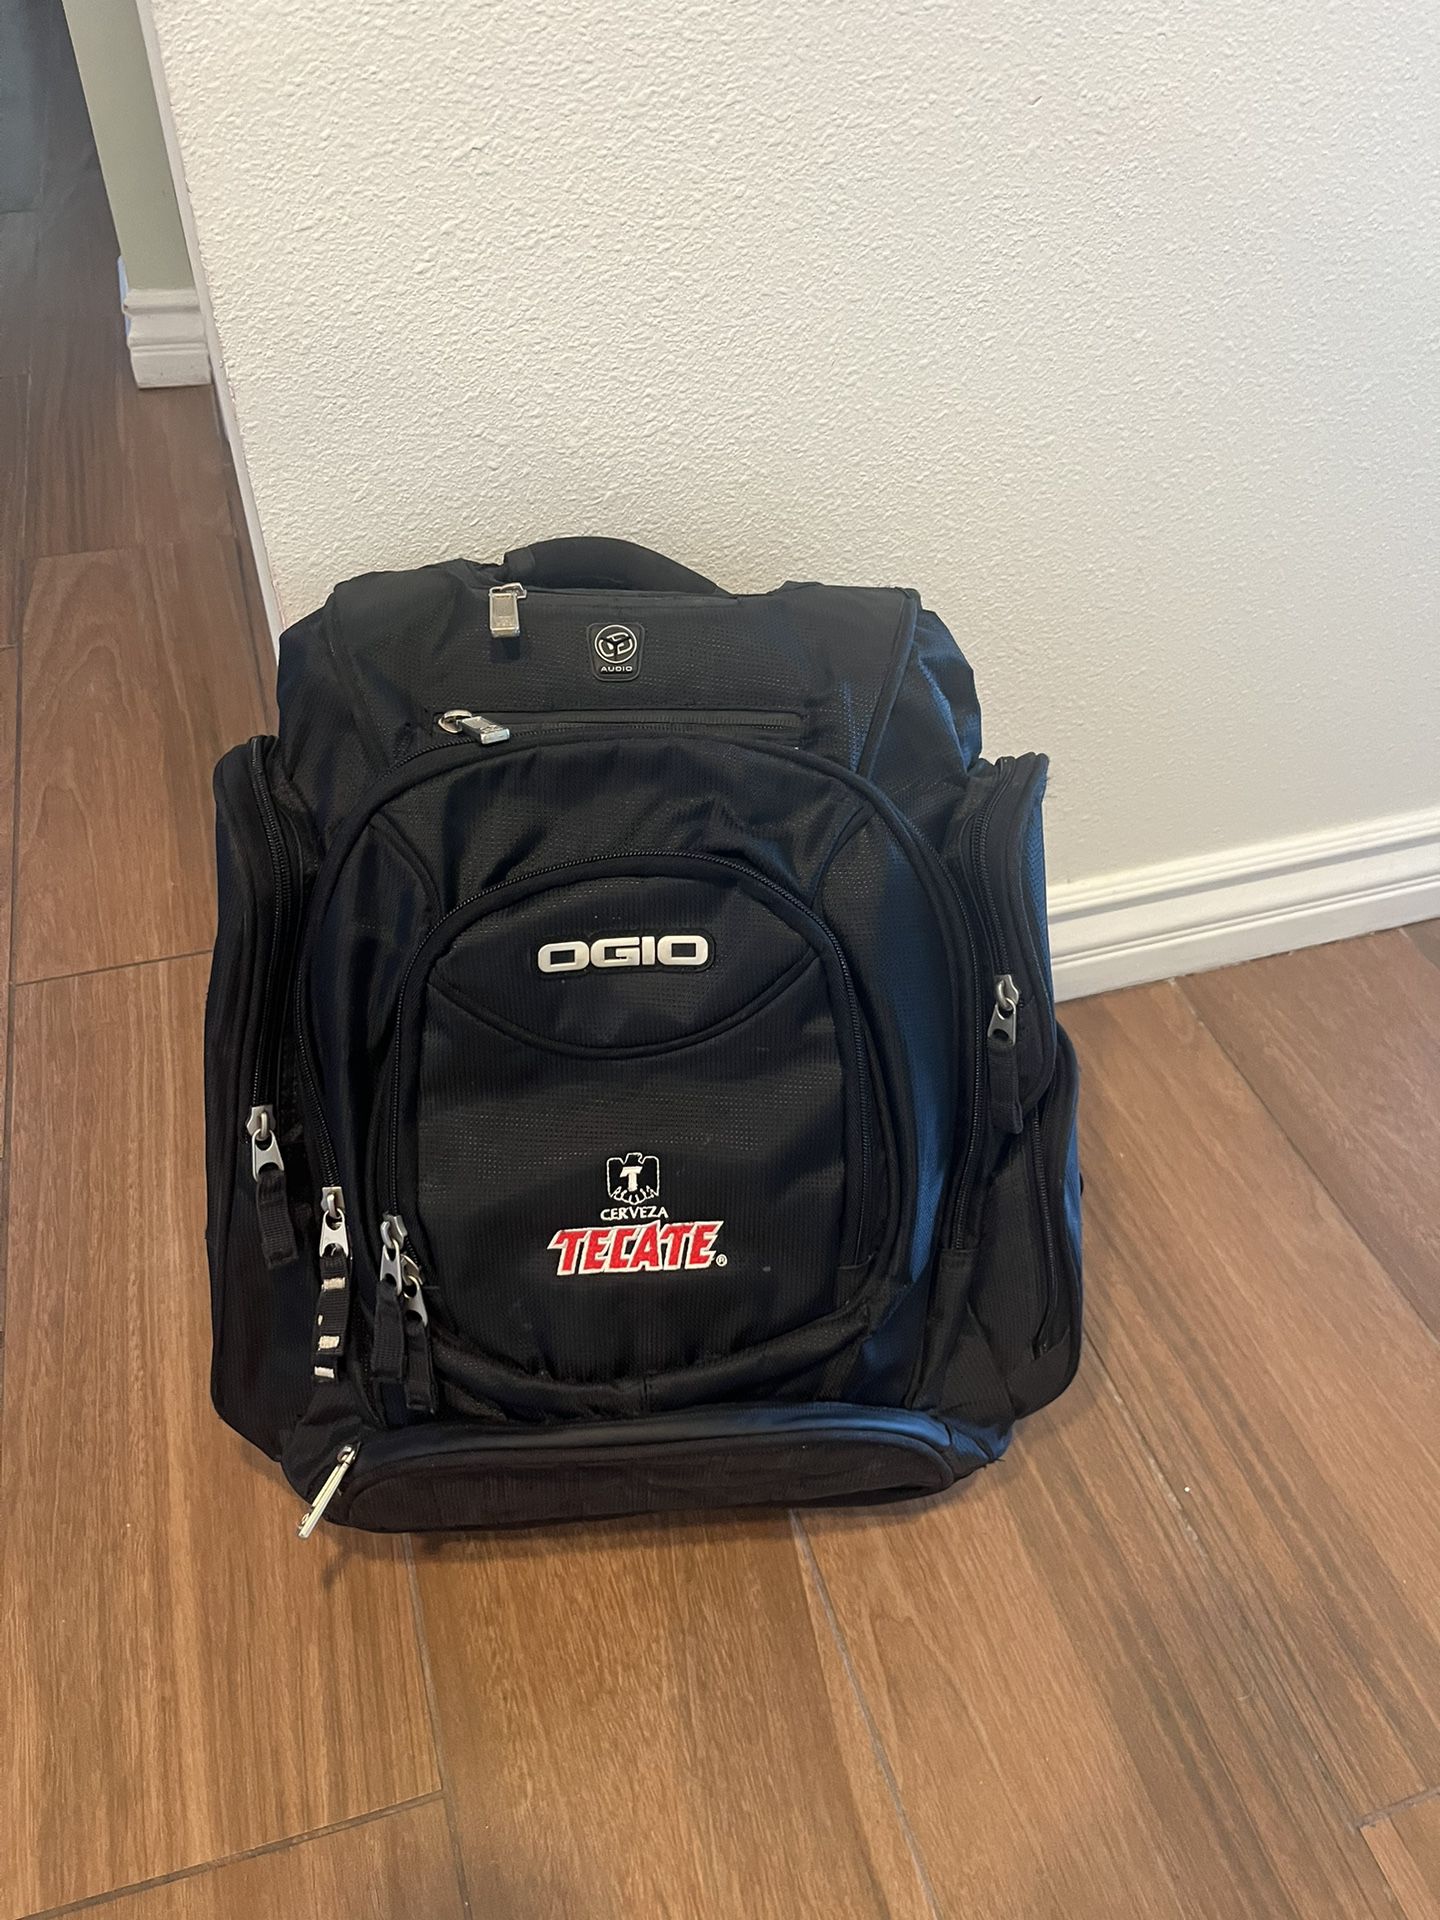 Ogio Tecate Travel Backpack 